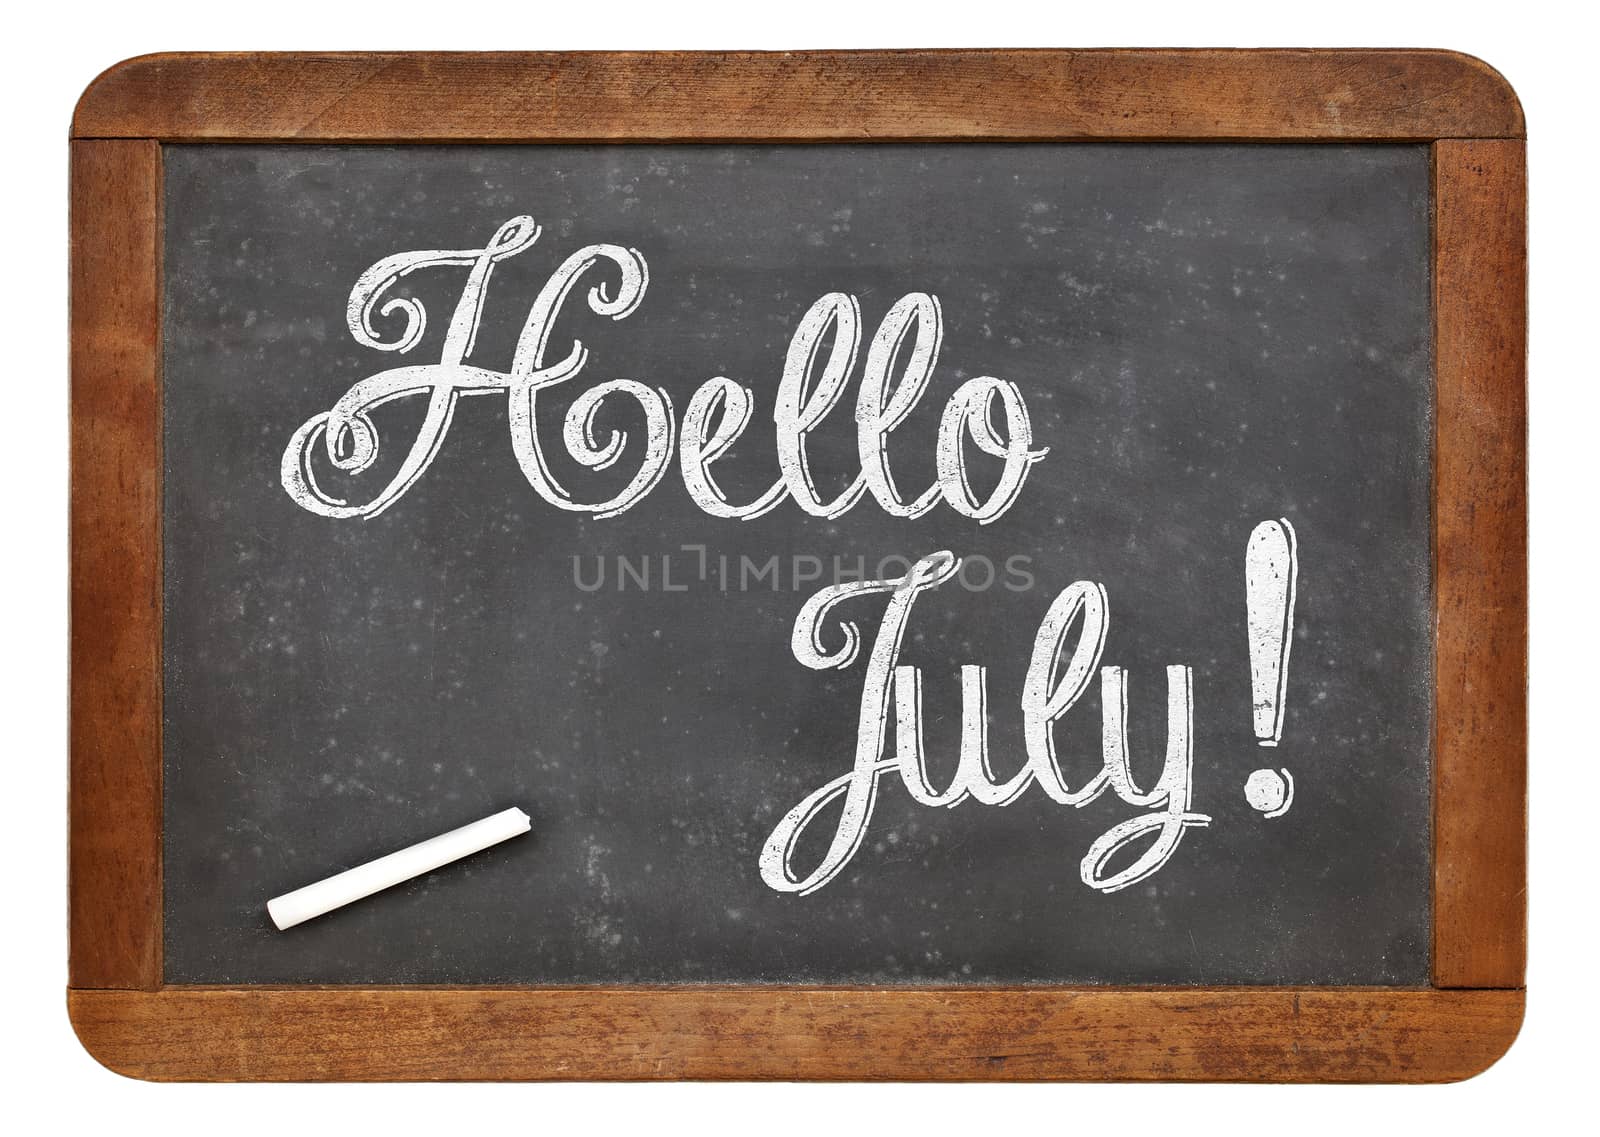 Hello July sign  - white chalk text on an isolated  vintage slate blackboard